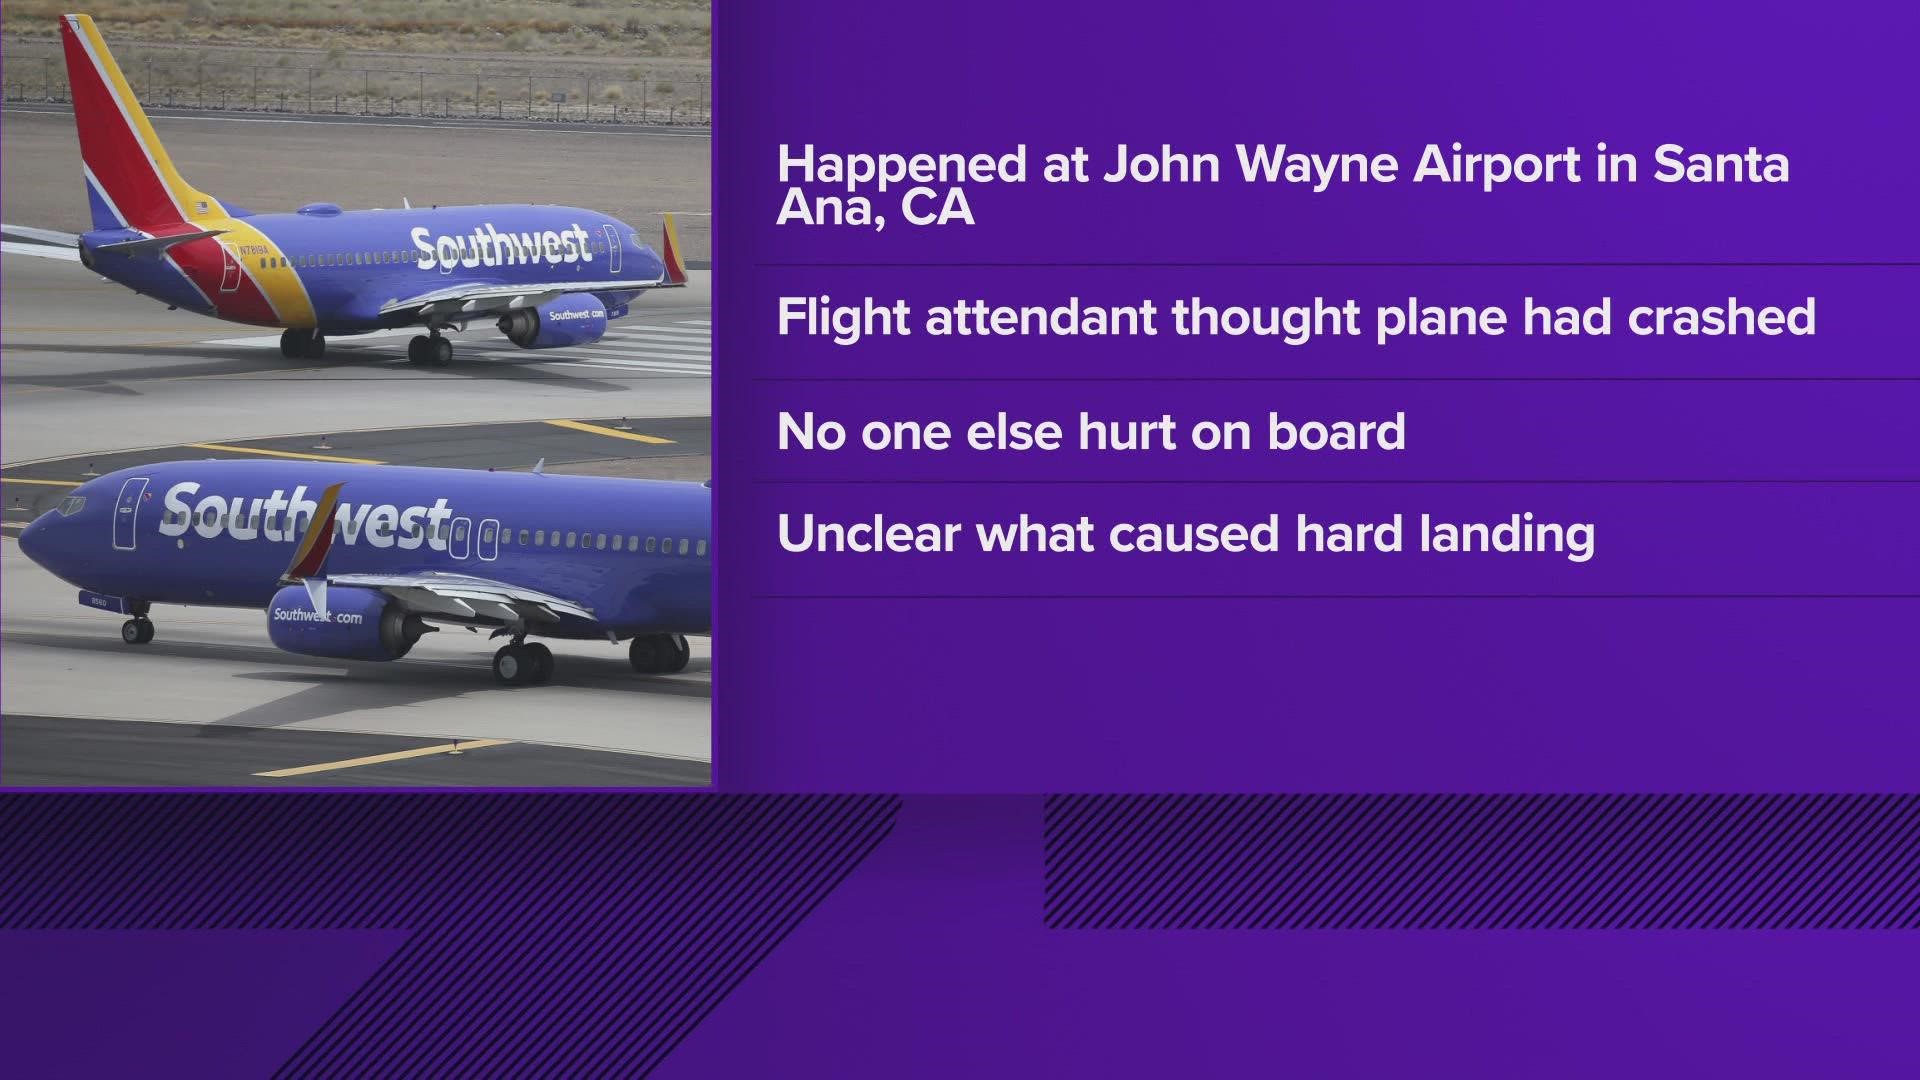 The National Transportation Safety Board said the impact of landing was so hard that the Southwest flight attendant thought the plane had crashed.